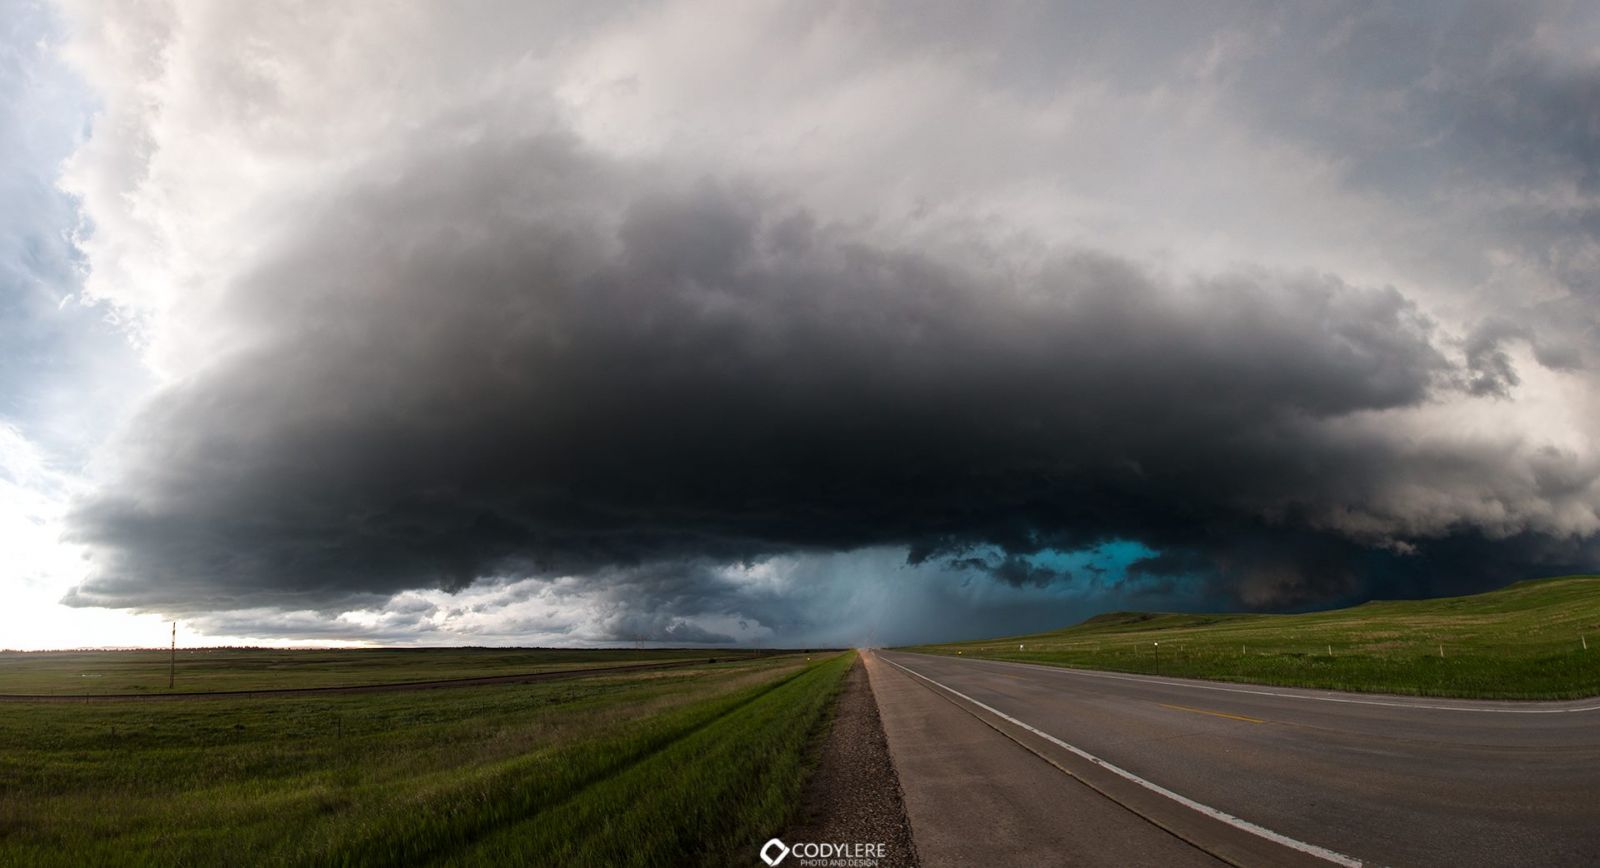 Supercell near Belle Fourche, SD, as it crossed Highway 212